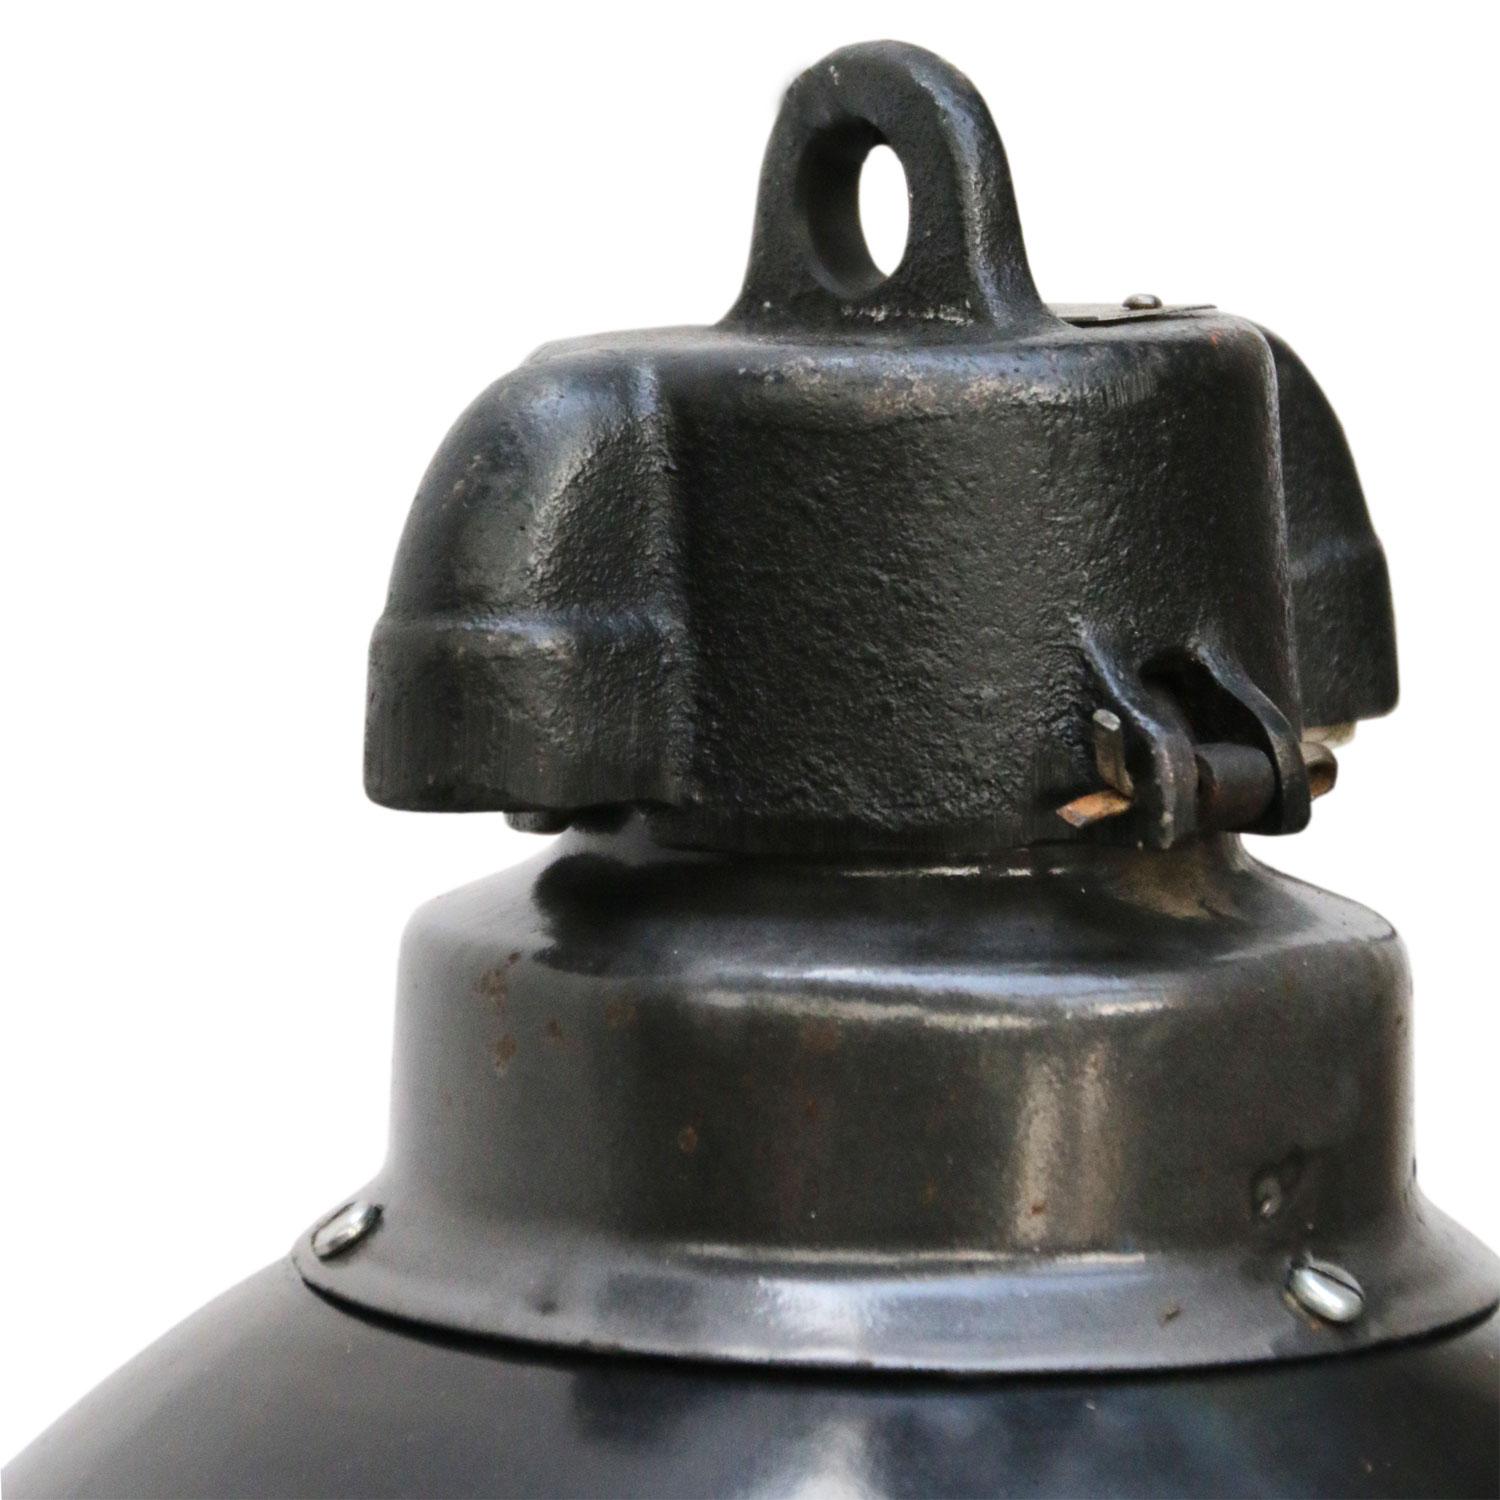 Bauhaus Classic from the 1930s. Black enamel Industrial hanging lamp.
Cast iron top. White interior.

Weight: 1.7 kg / 3.7 lb

Priced per individual item. All lamps have been made suitable by international standards for incandescent light bulbs,